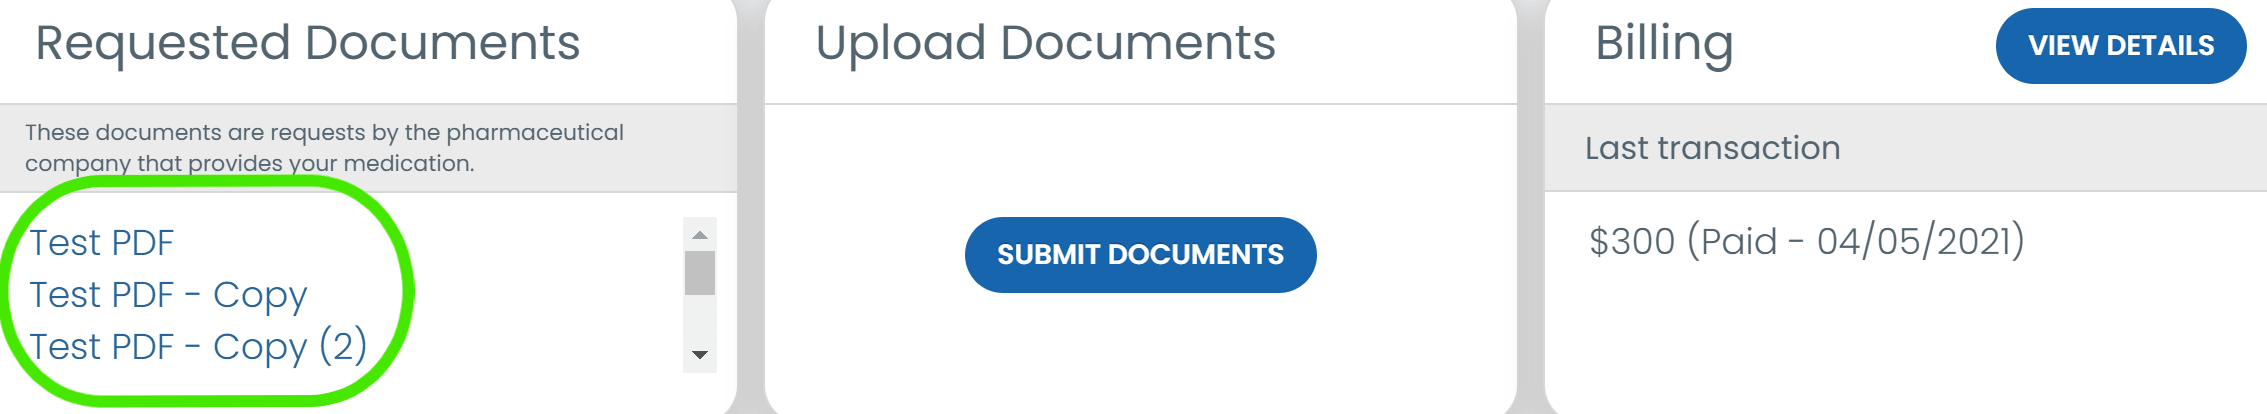 how to view requested documents